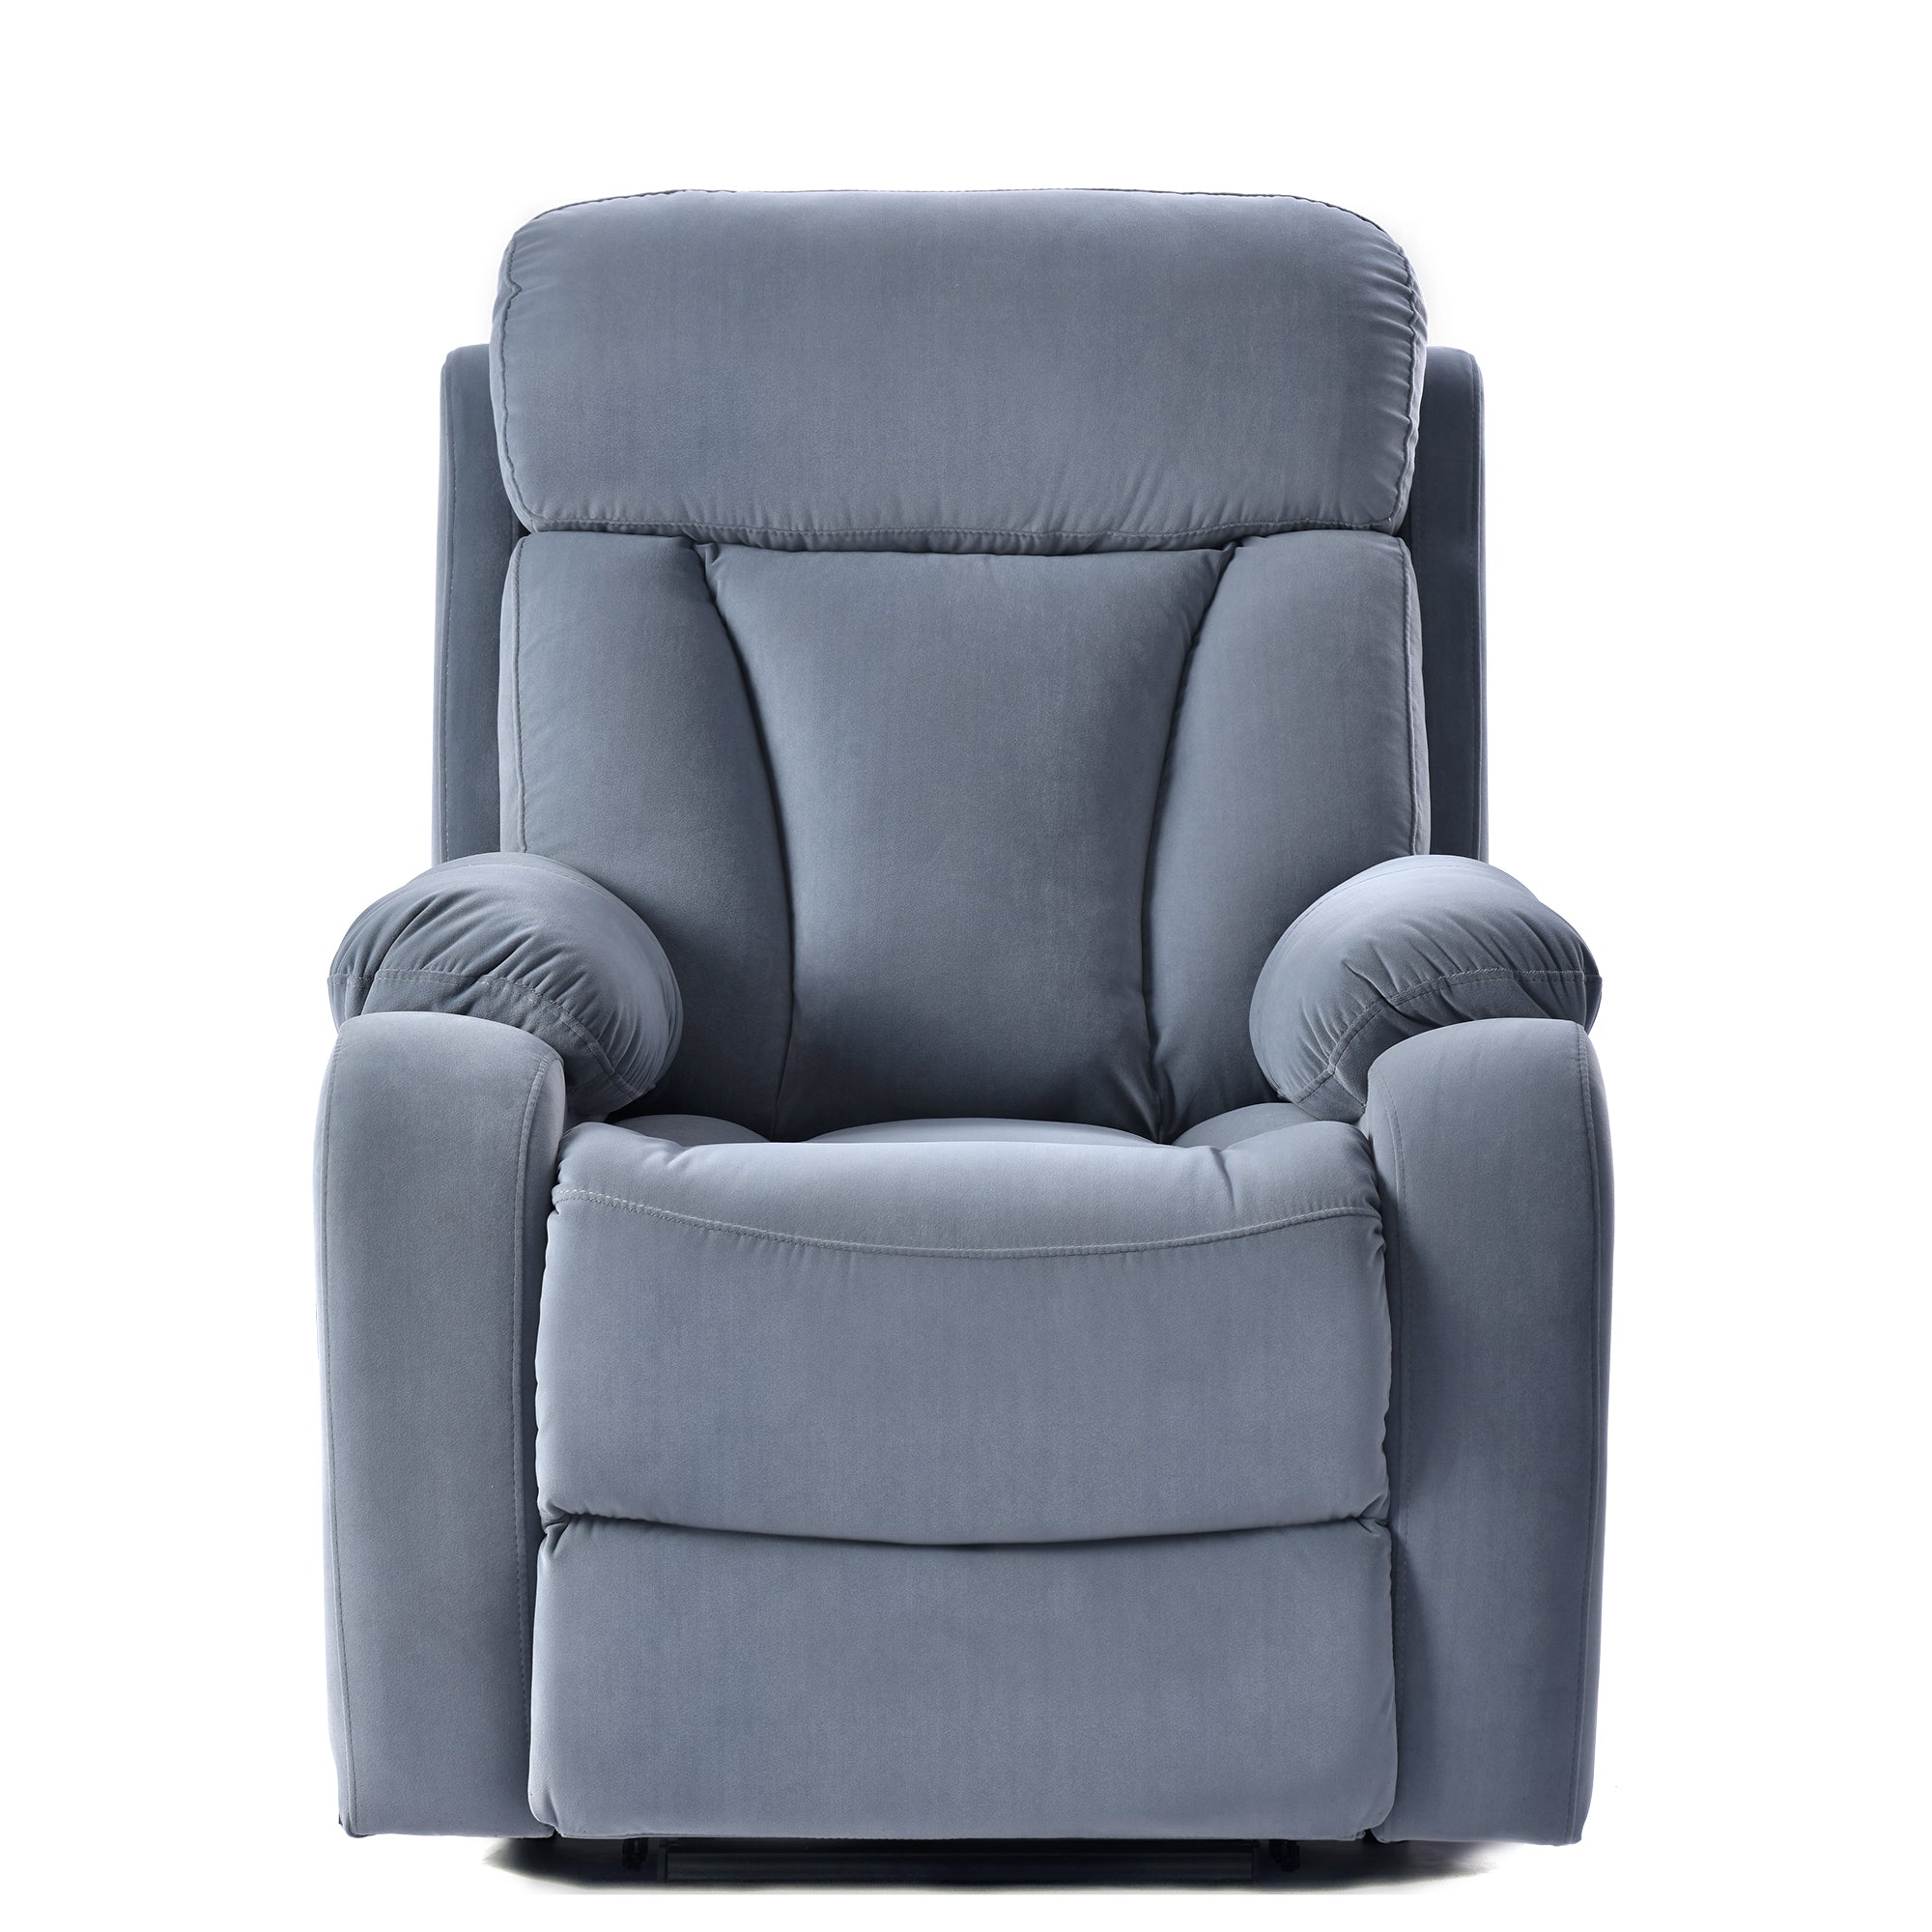 Front seated view of power lift chair recliner